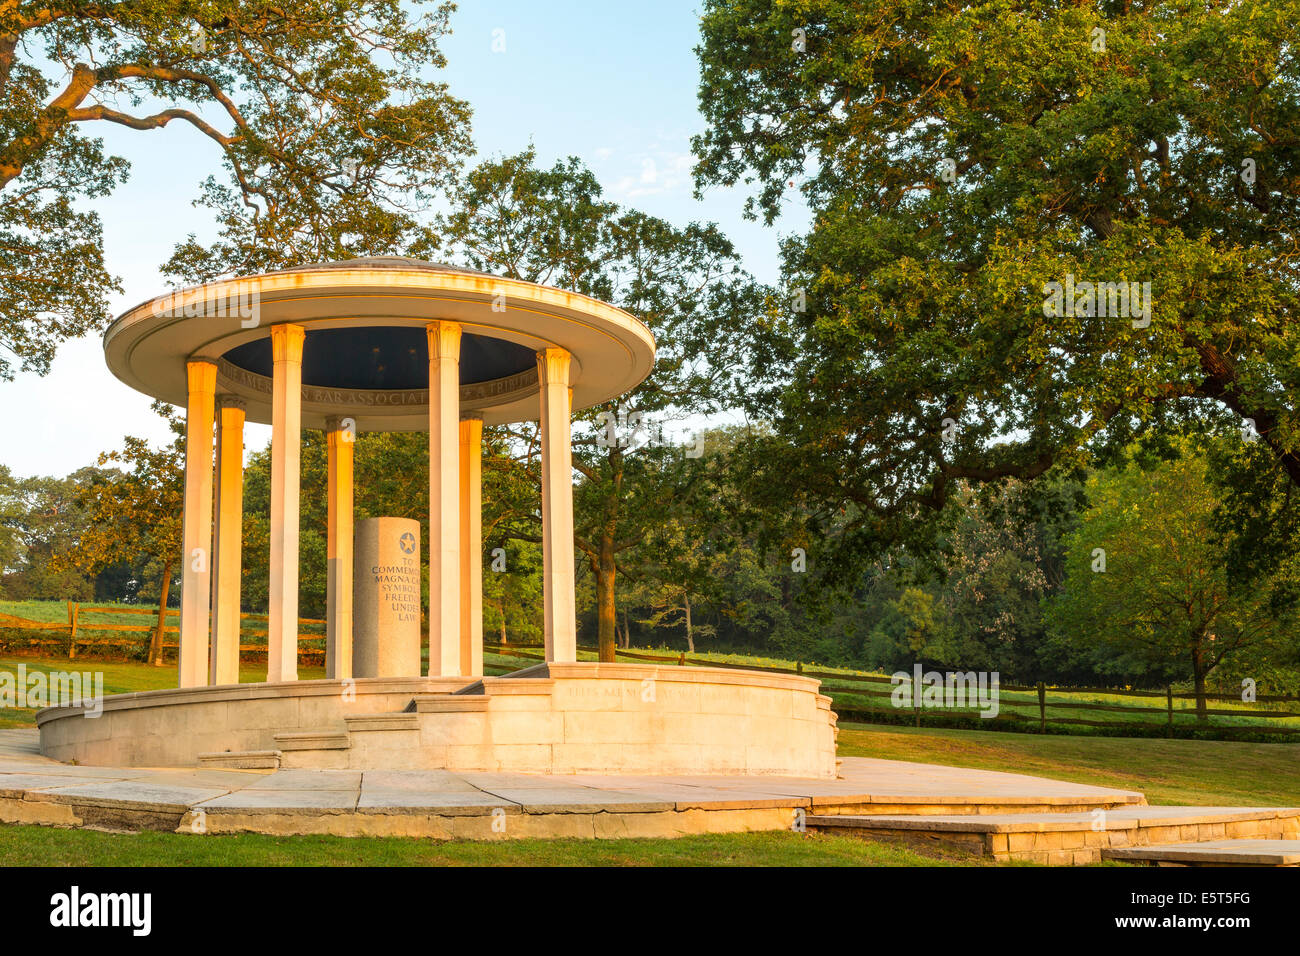 Magna Carta Memorial at Runnymede, Surrey, England, UK. The memorial was created by the American Bar Association in 1957 Stock Photo